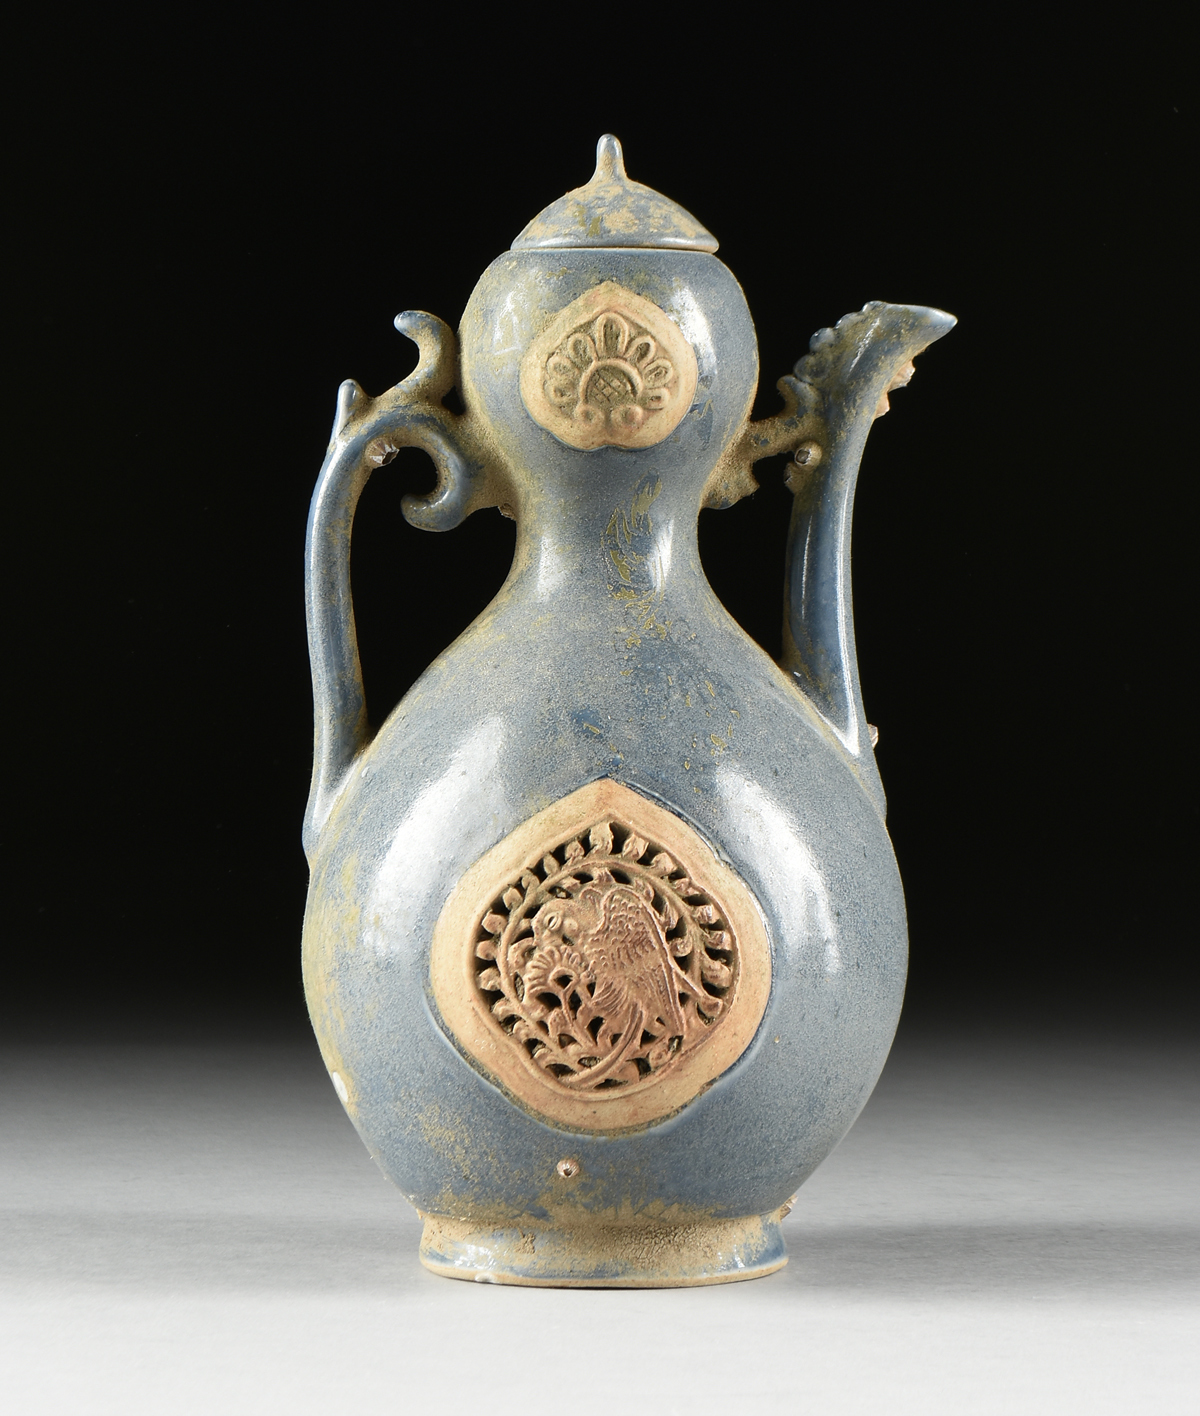 A VIETNAMESE/ANNAMESE BLUE GLAZED DOUBLE GOURD PORCELAIN EWER, SHIPWRECK ARTIFACT, 15TH/16TH - Image 8 of 11